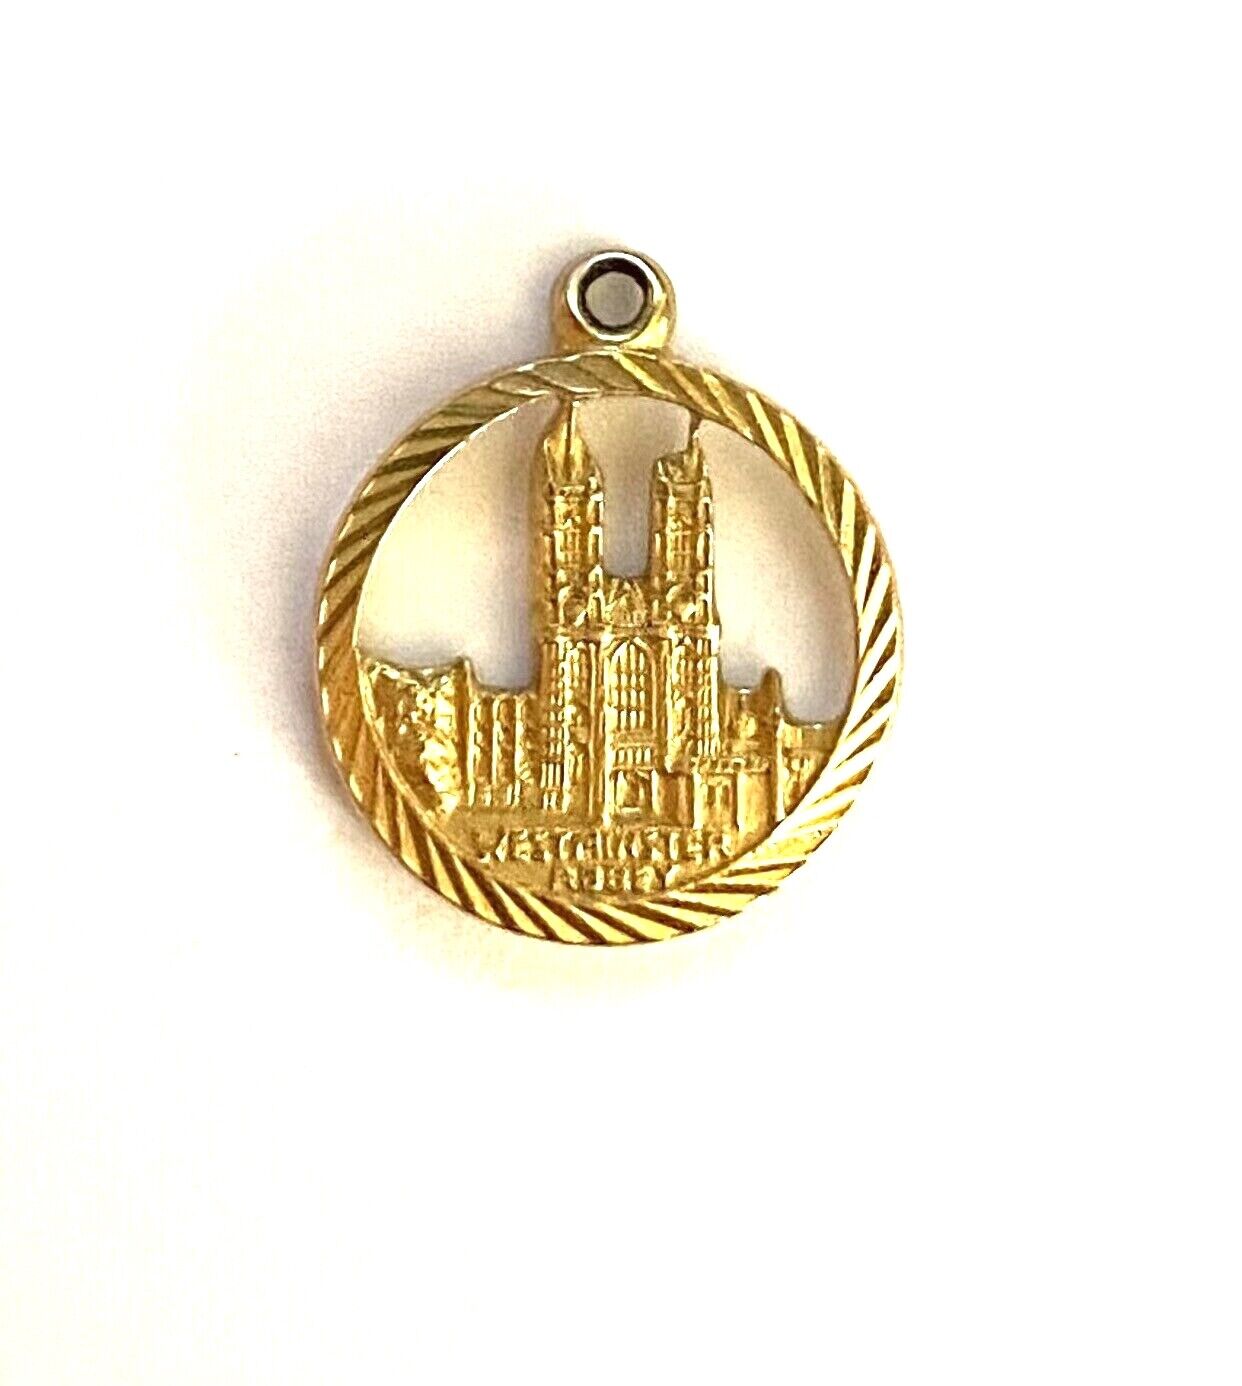 9ct vintage westminster abbey disc charm by Georg jensen